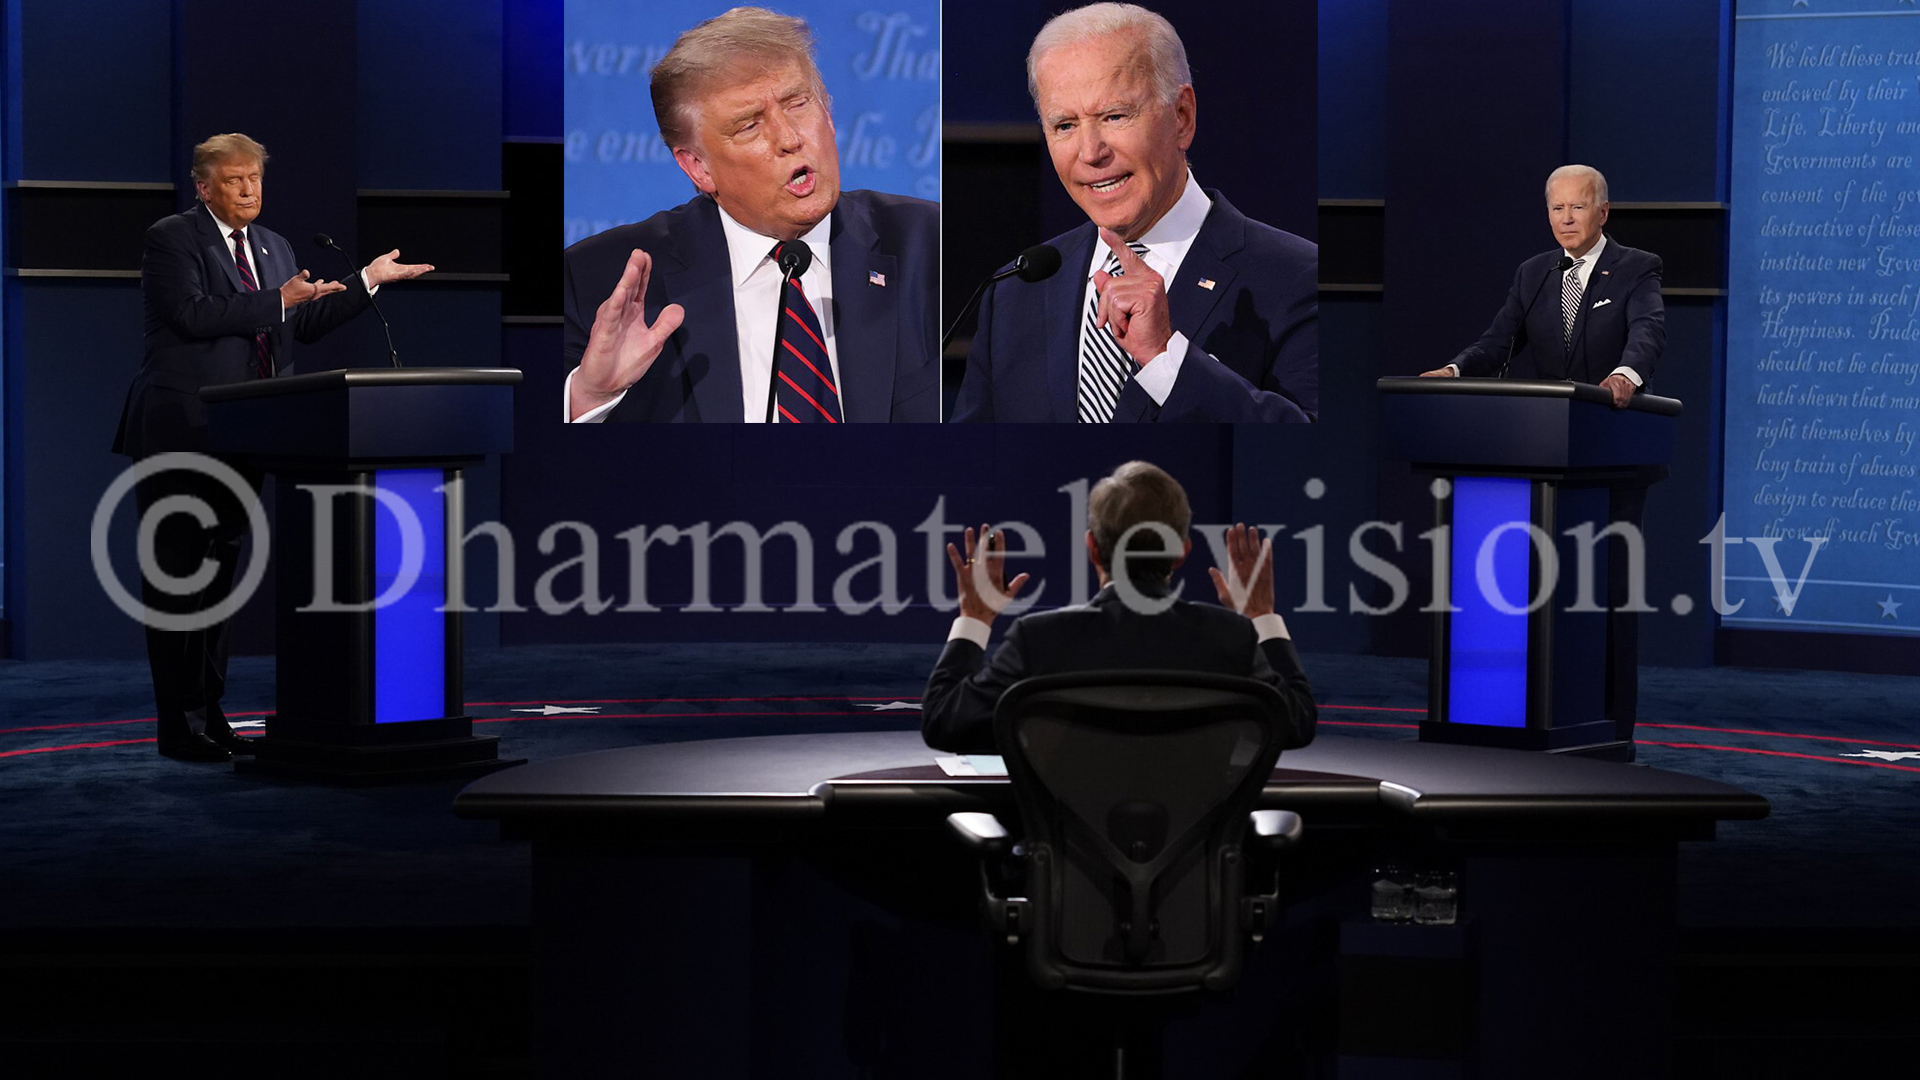 Third and Final US Election Presidential Debate on Oct 22